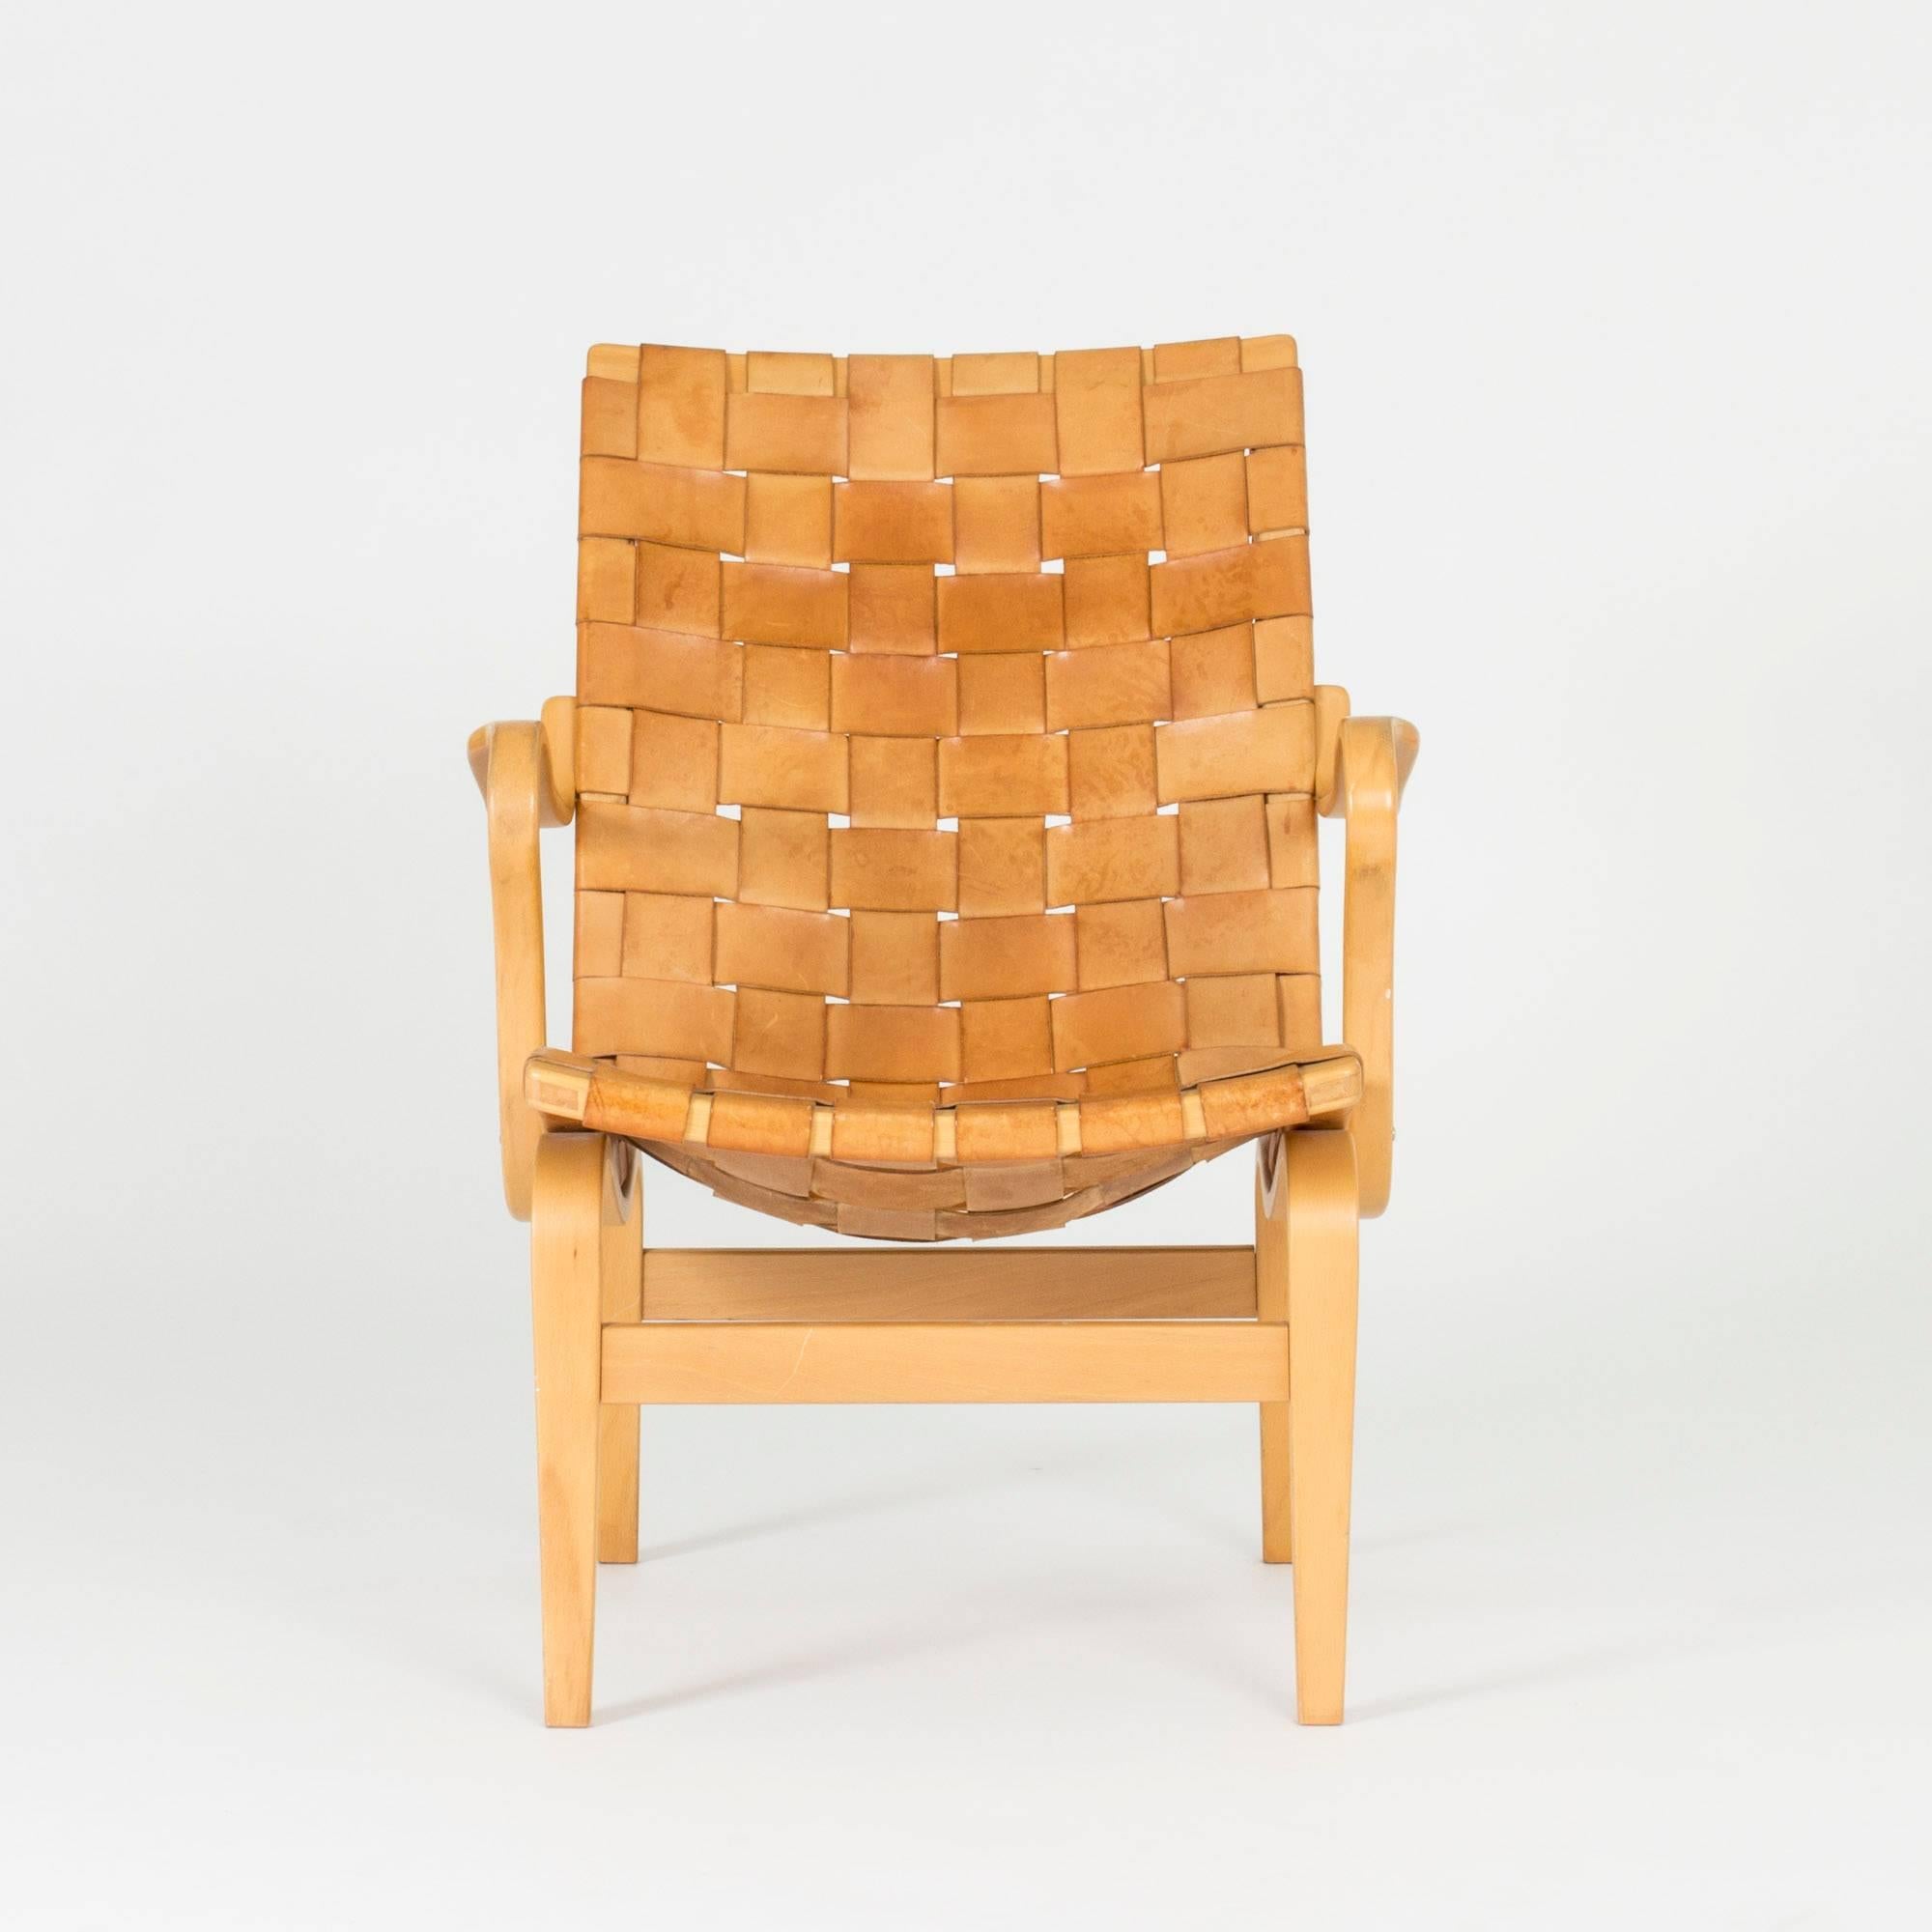 Gorgeous “Eva” lounge chair by Bruno Mathsson, with a wreathed leather seat on a beech bentwood frame. Beautifully patinated natural colored leather.